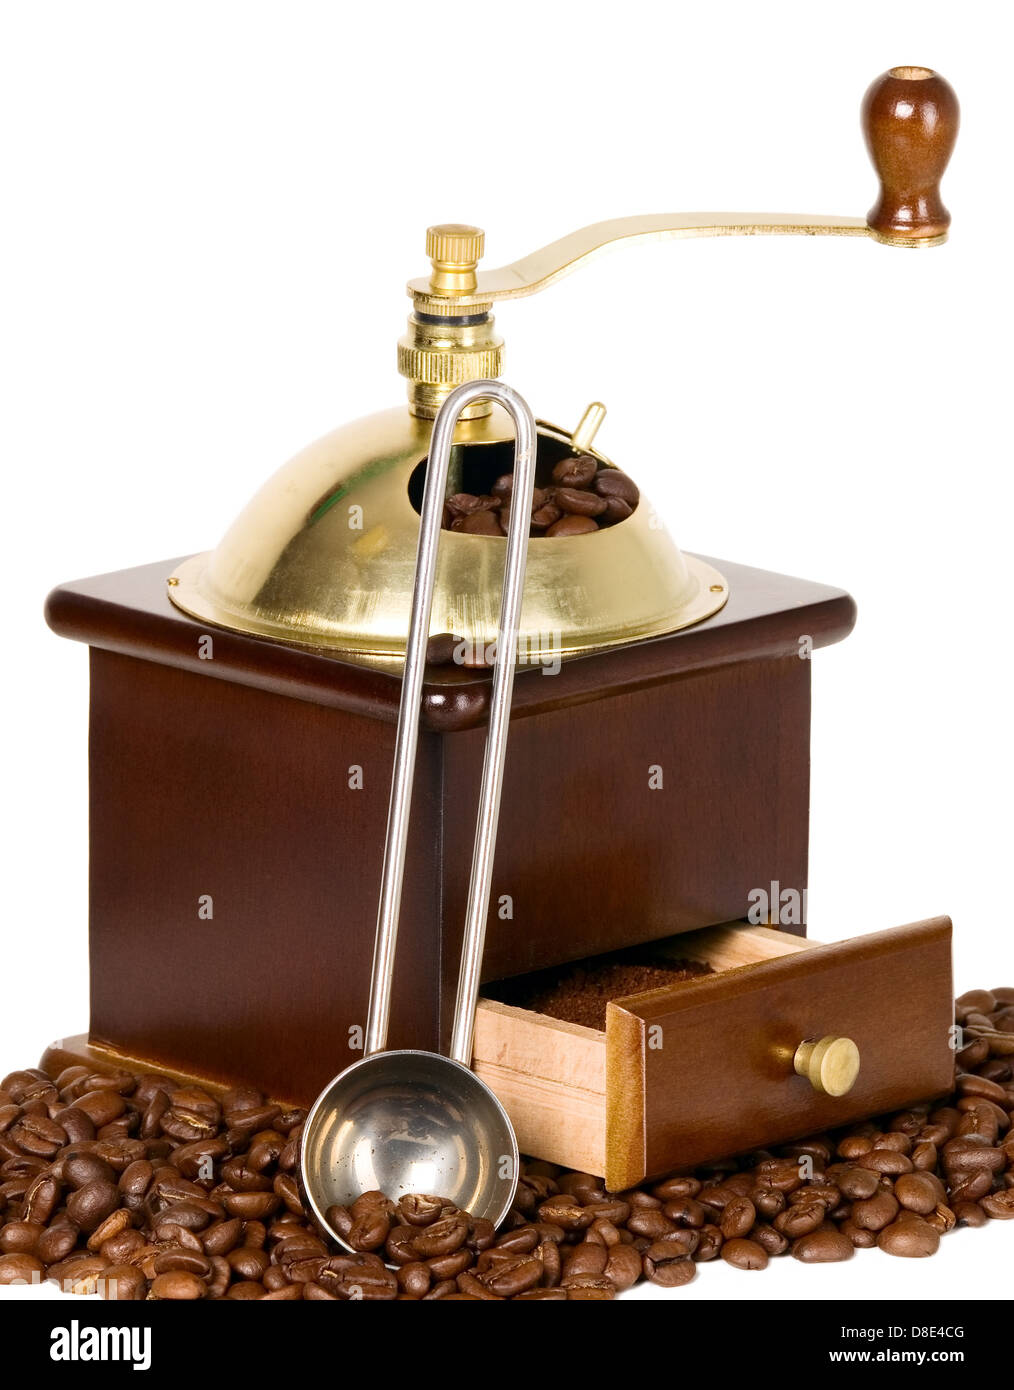 Coffee grinder in wooden case with golden top Stock Photo